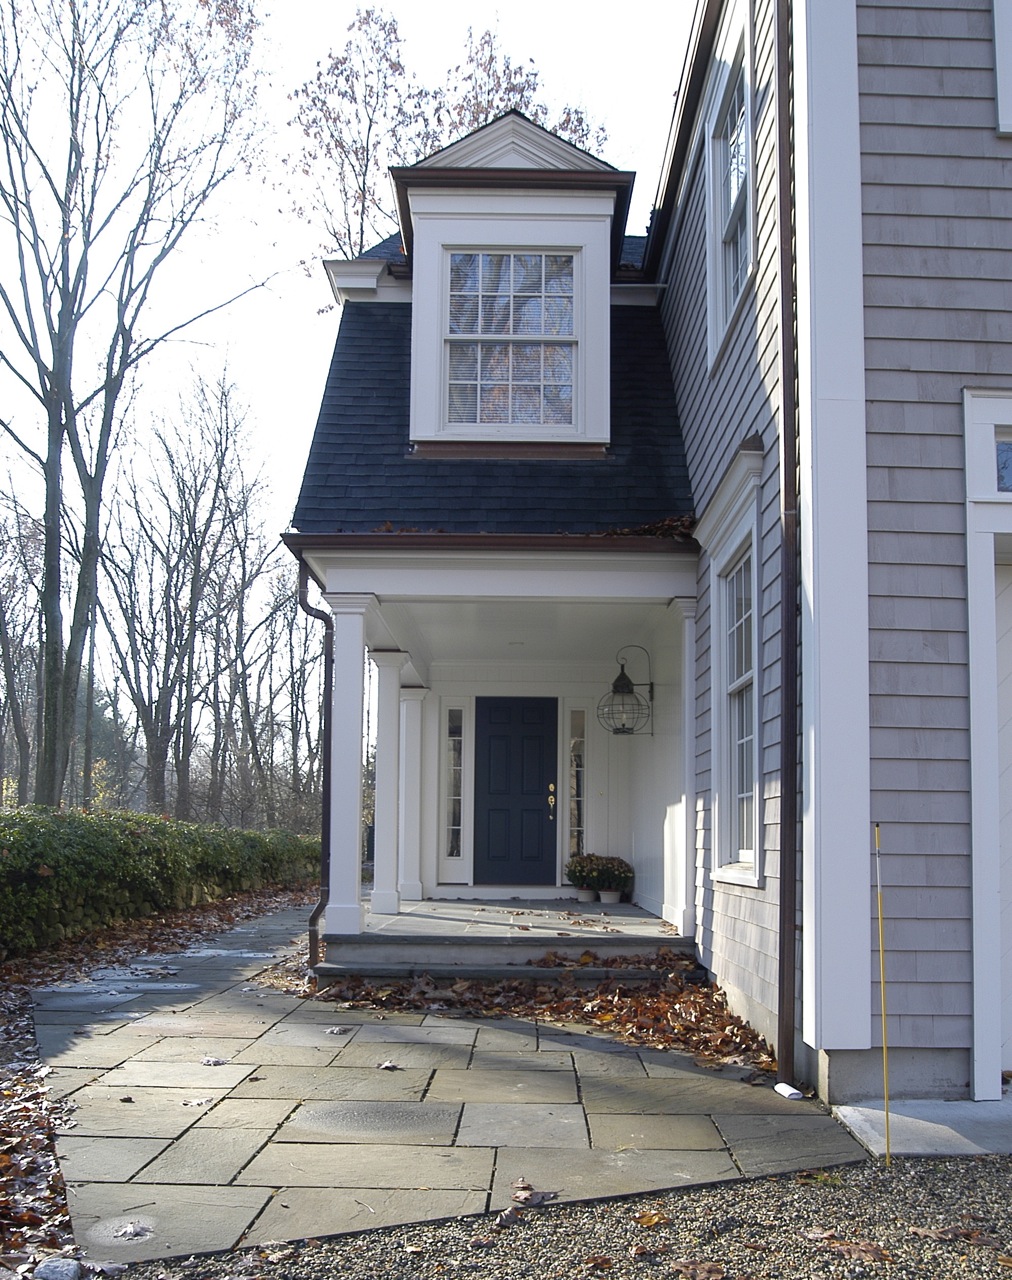 Entry porch with doghouse dormer in Gambrel roof